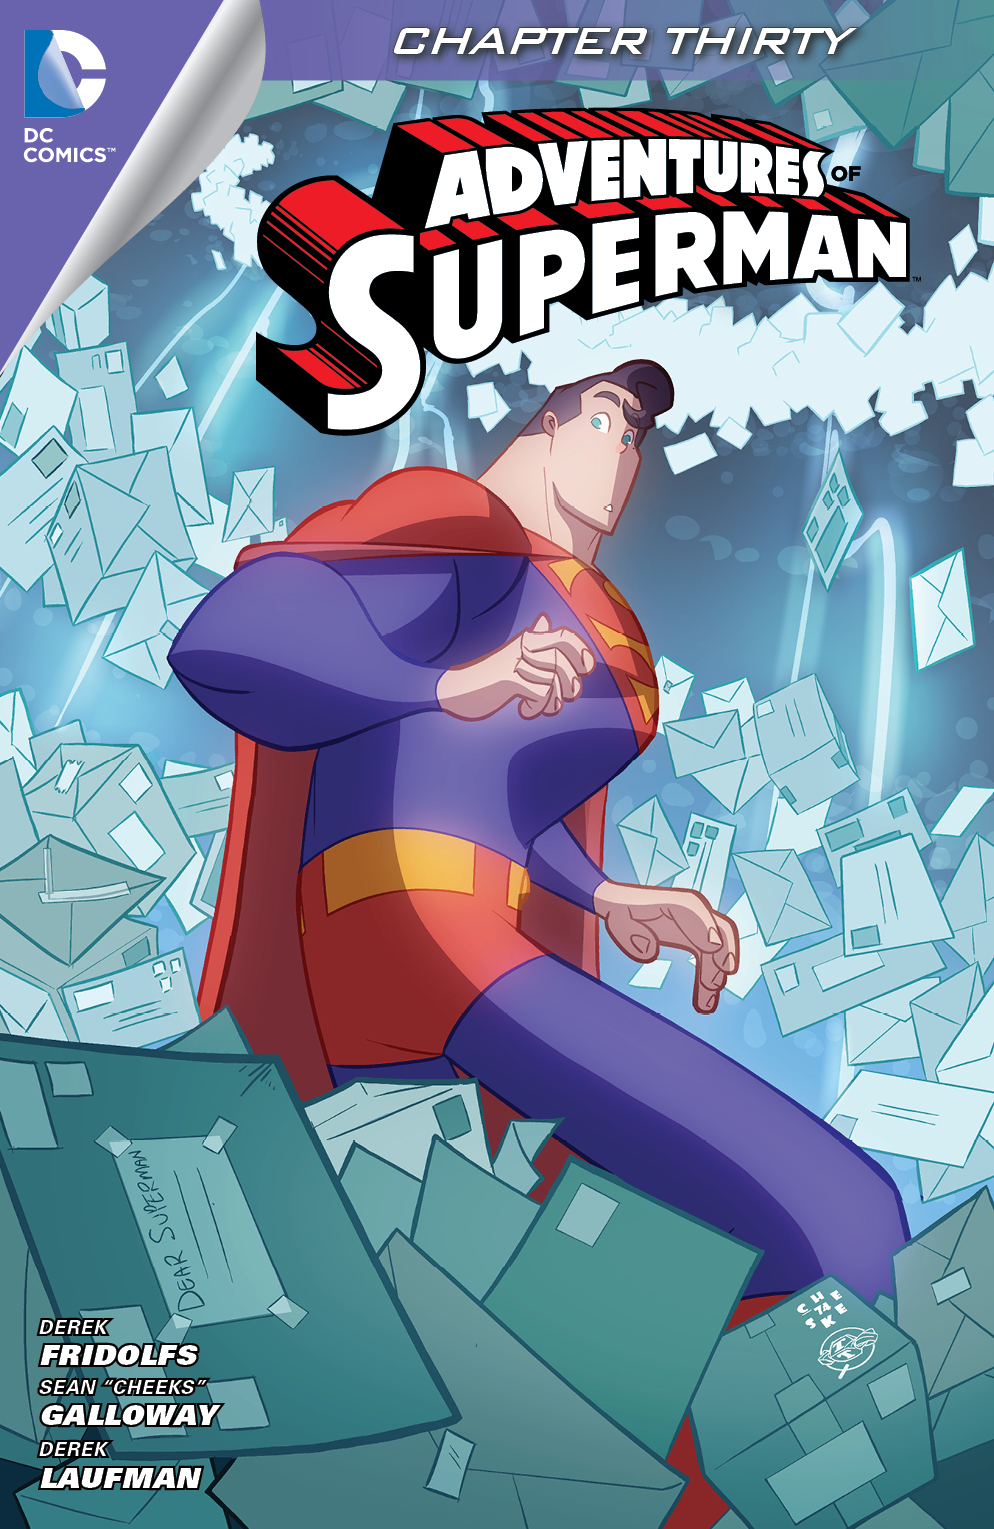 Adventures of Superman (2013-) #30 preview images